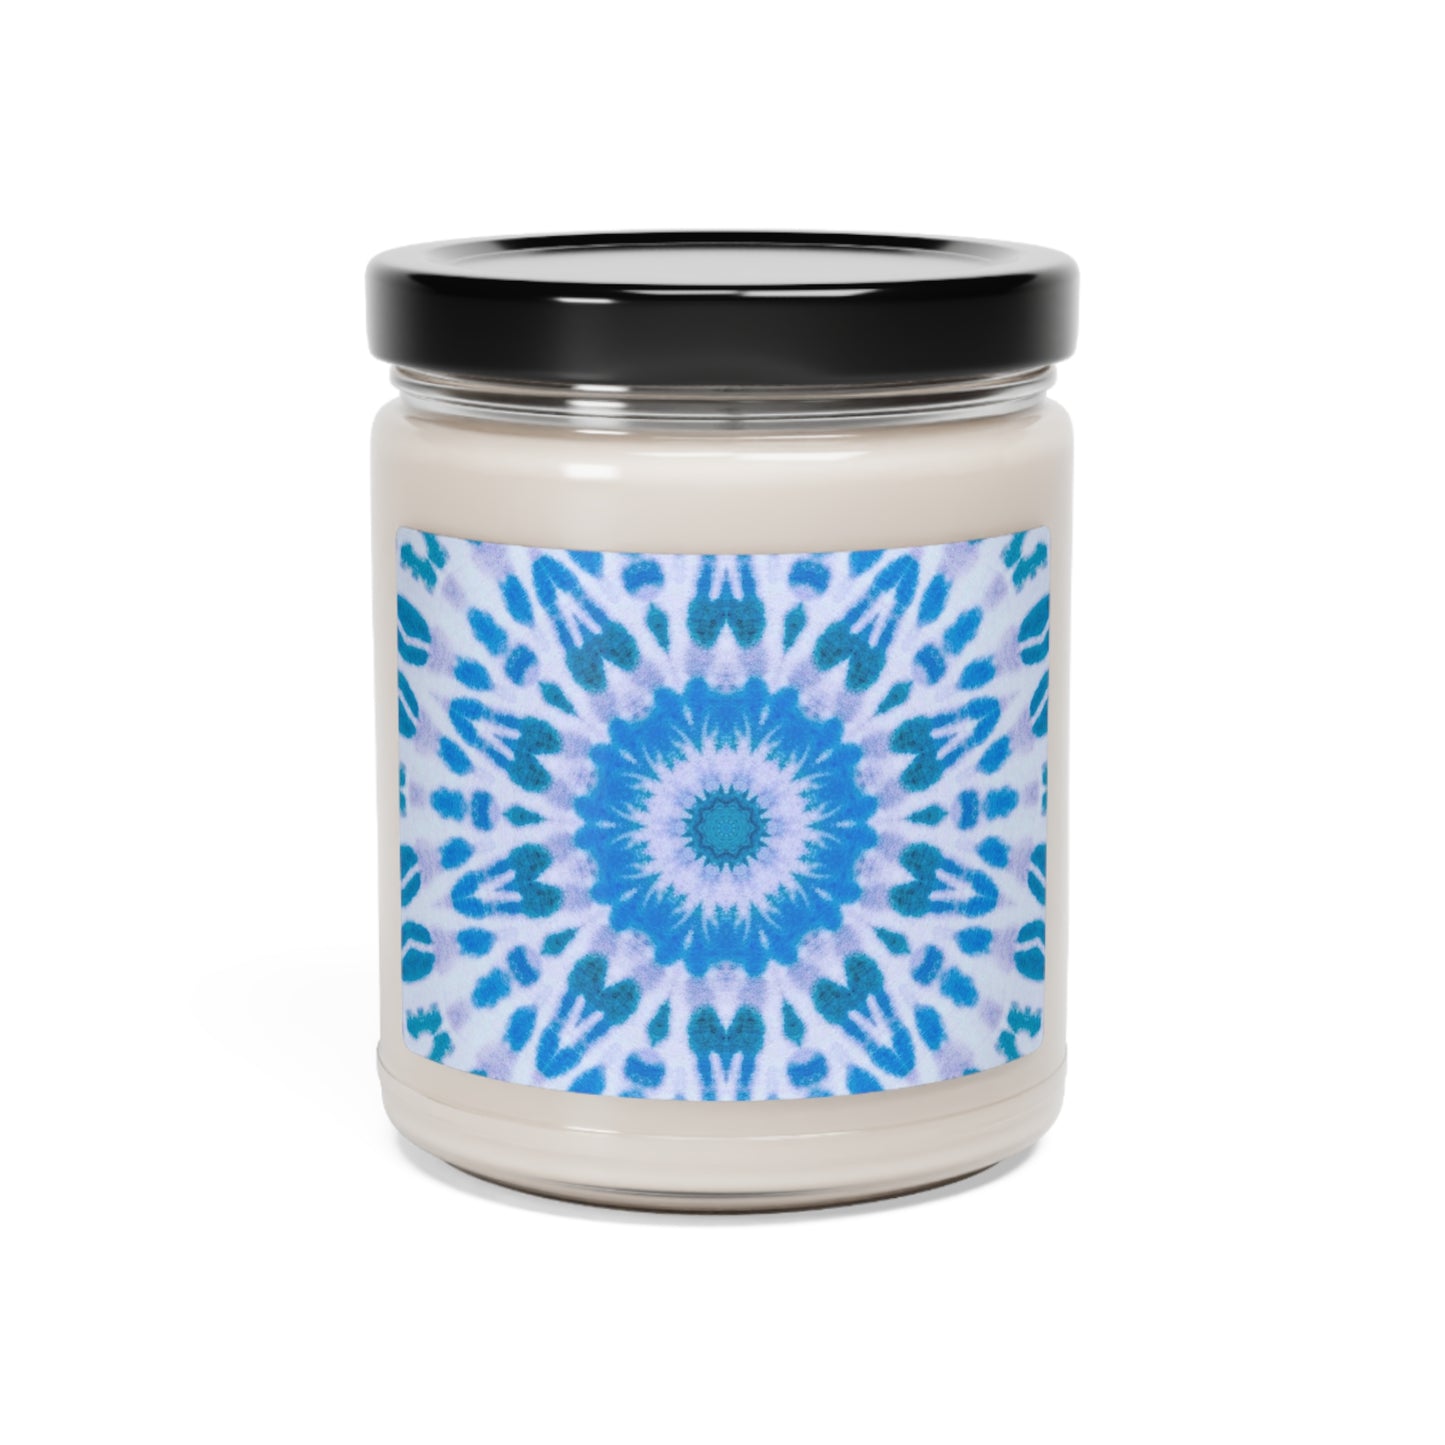 Scented Soy Candle (E-VEIL EYE)